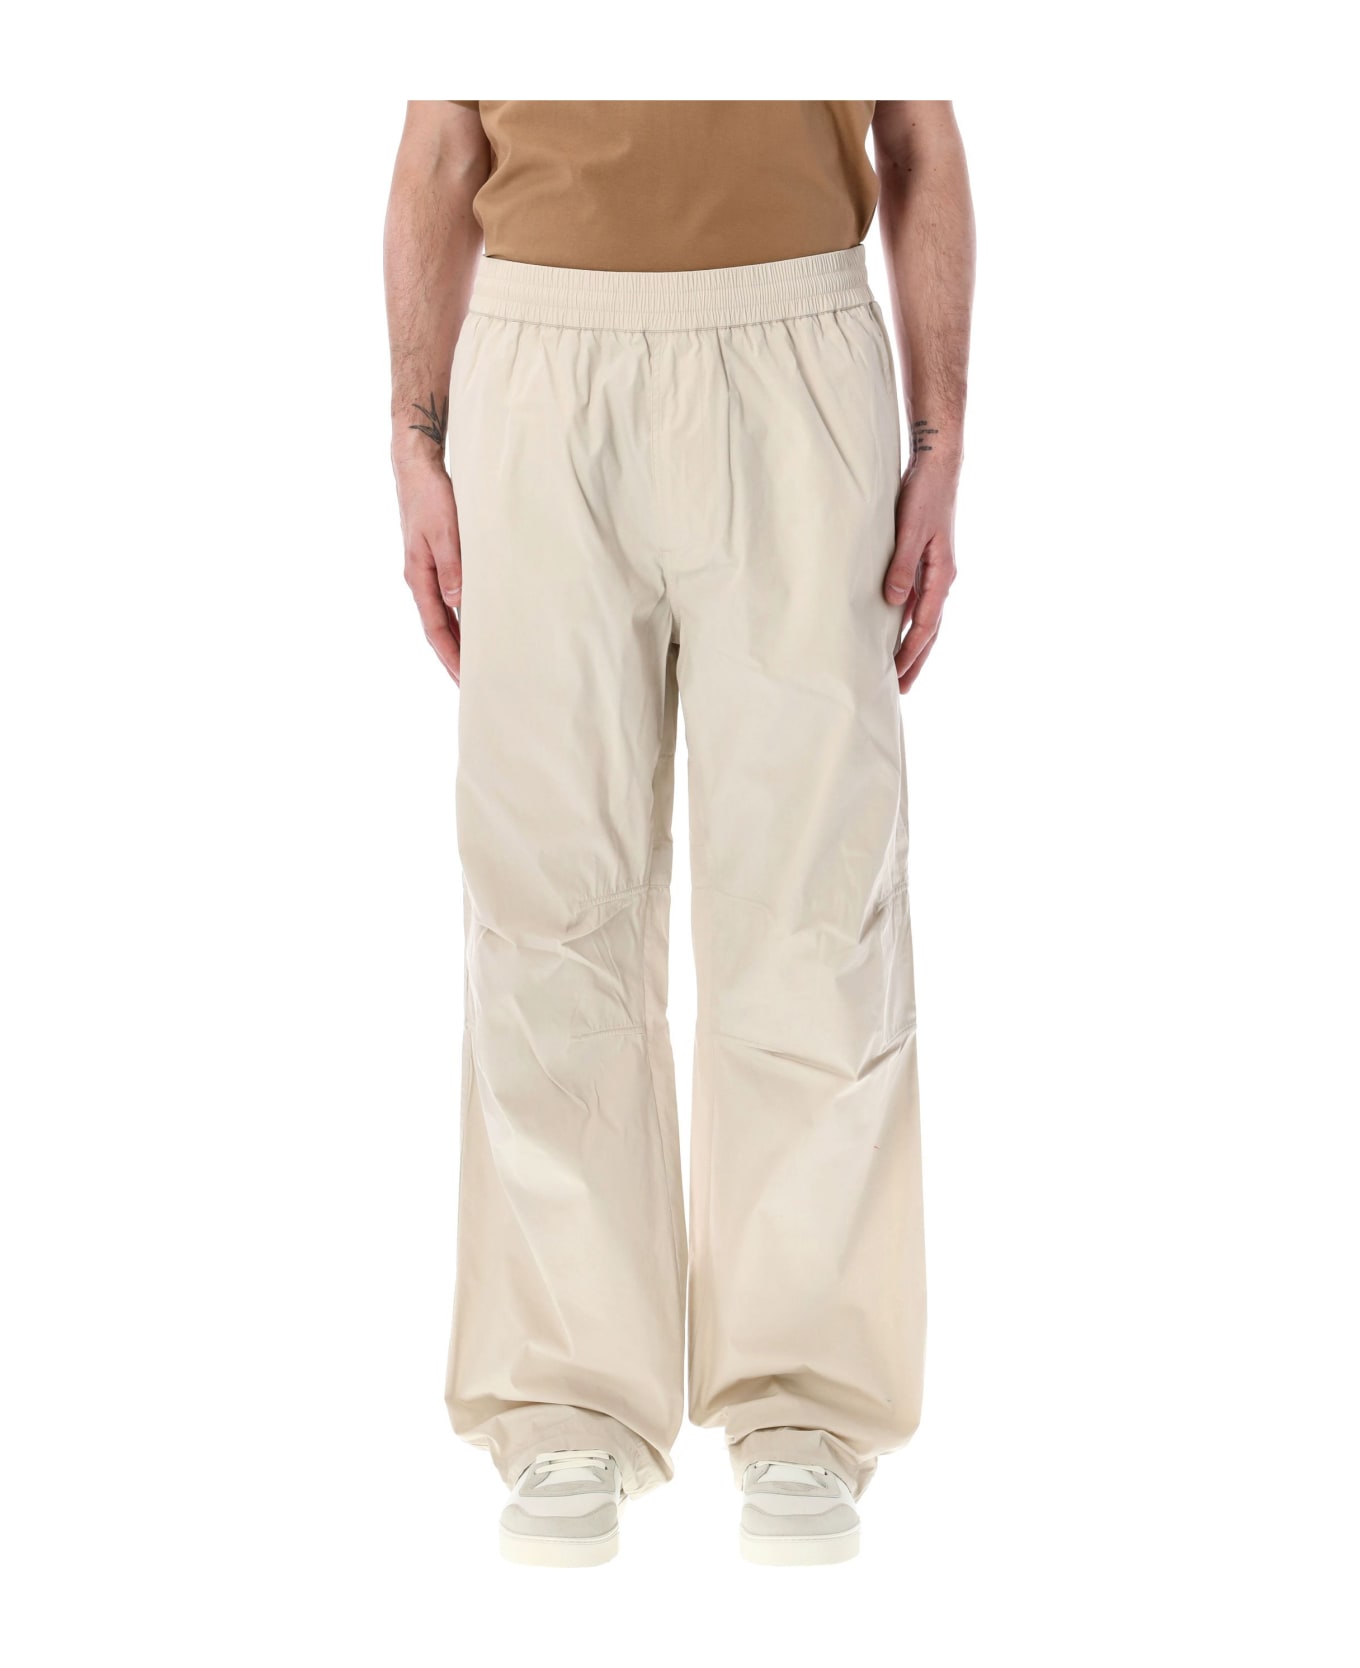 Burberry London Cargo Trousers - WHEAT